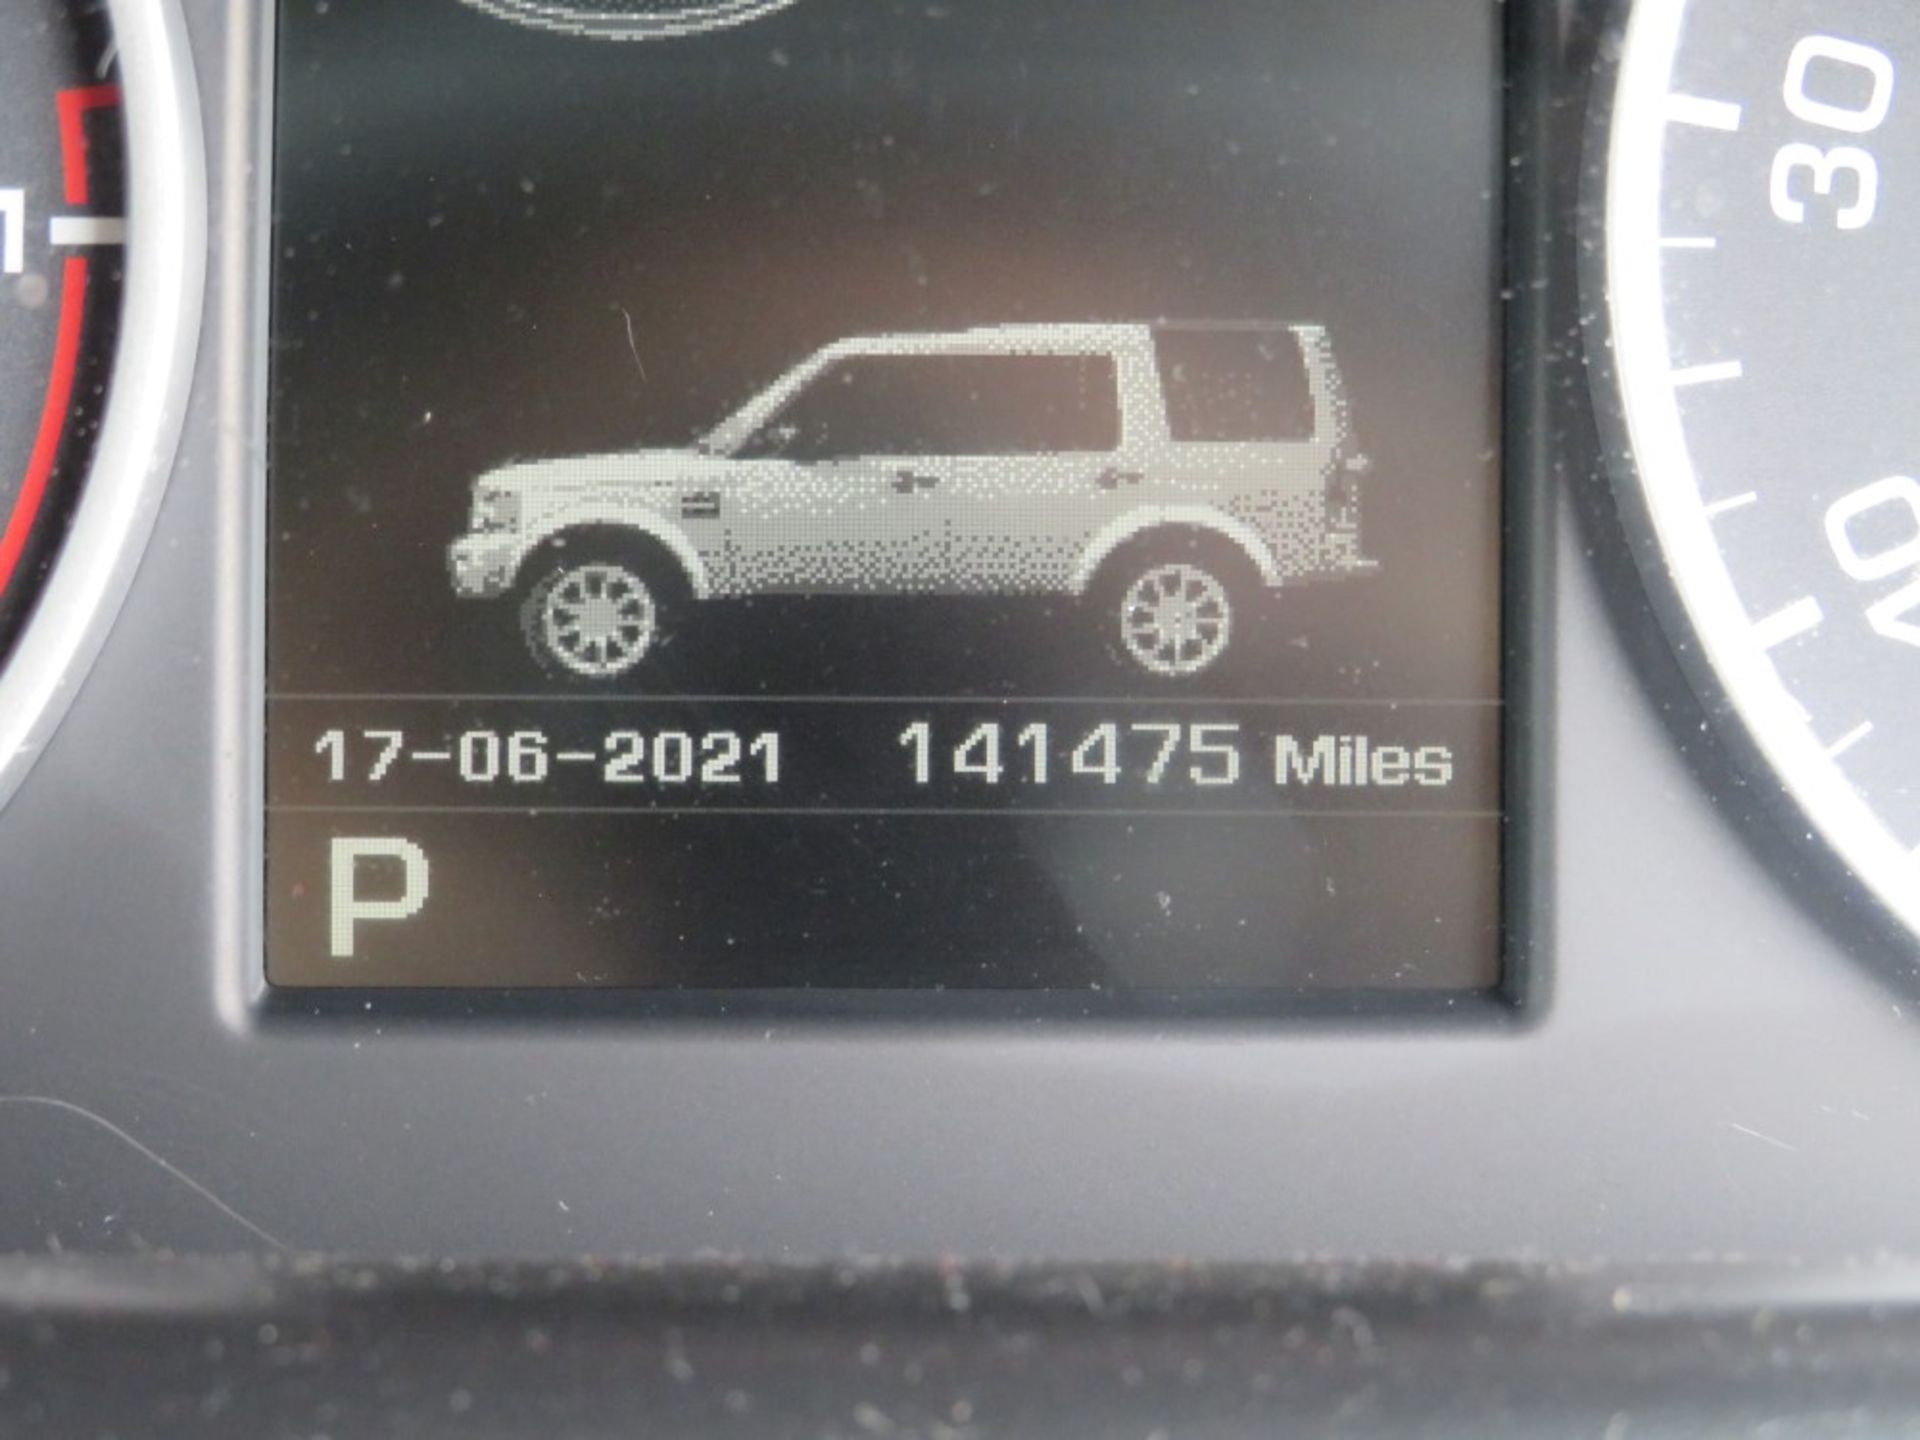 12 reg LAND ROVER DISCOVERY SDV6 AUTO 255 - Â£4000 SEAT CONVERSION IN BACK, 1ST REG 03/12, TEST 01/ - Image 7 of 7